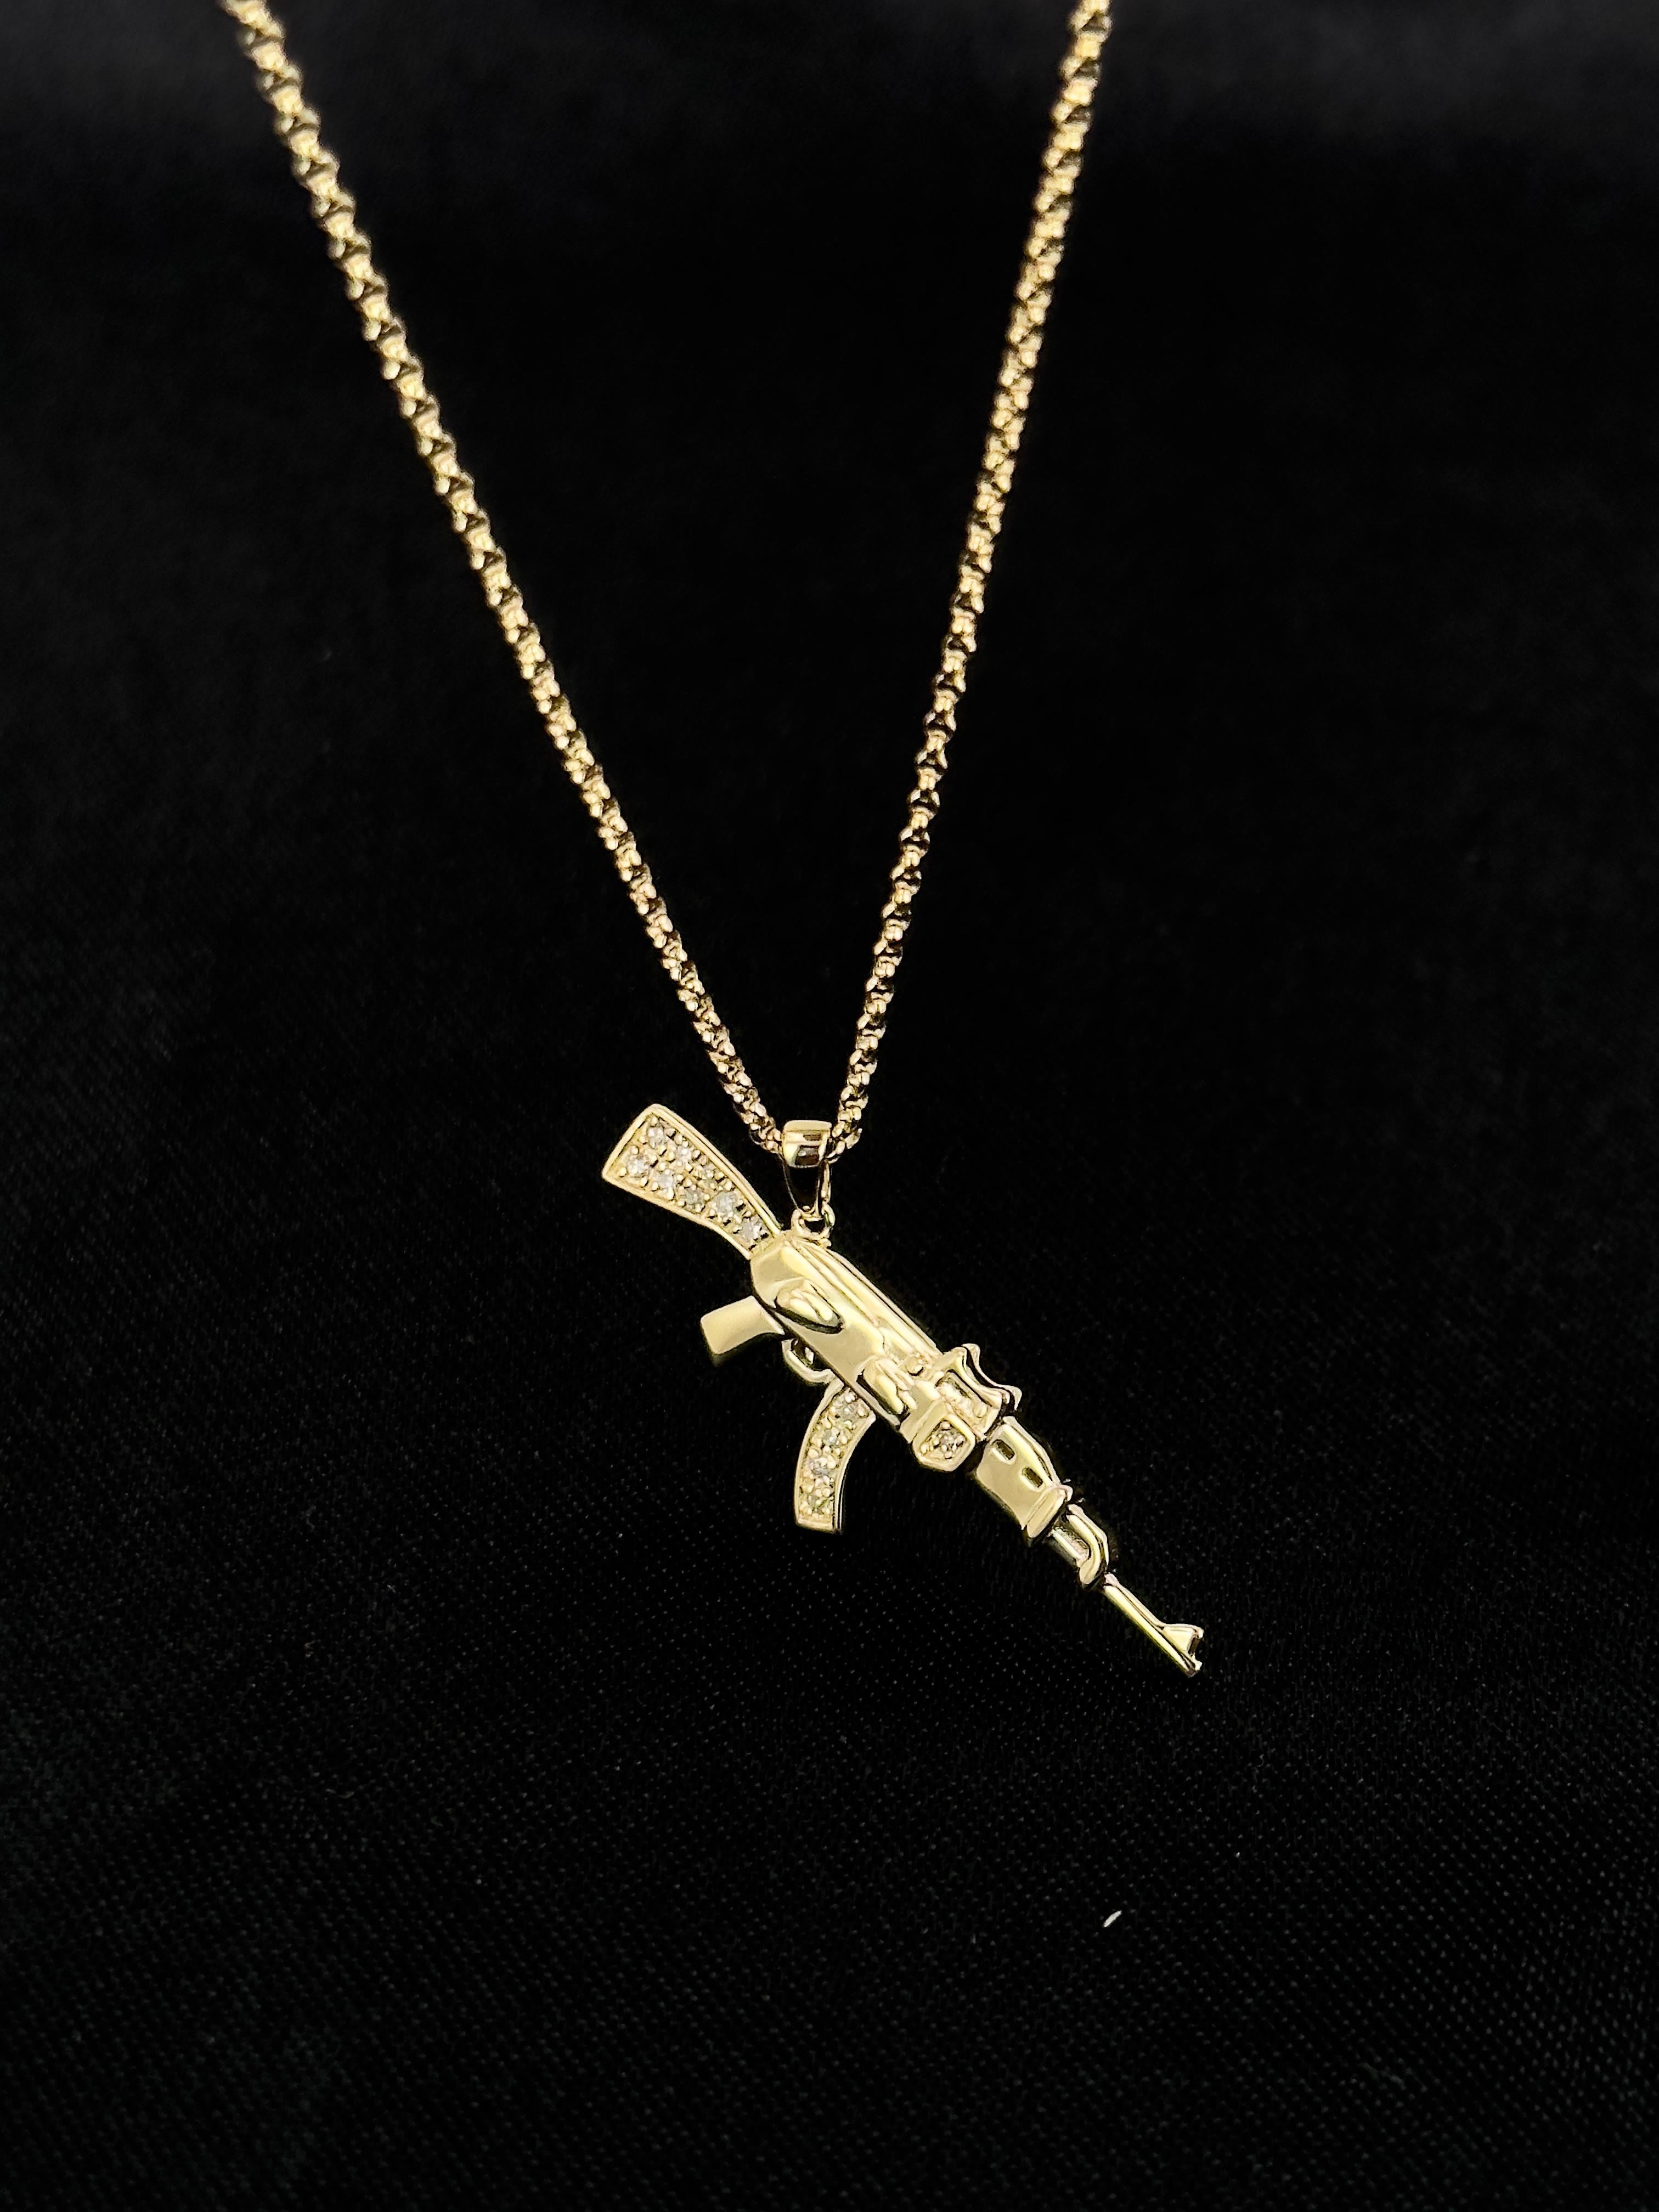 14k Gold Gun Charm Necklace, Diamond Gun Necklace, Charm Necklaces, Solid Gold  In New Condition For Sale In New York, NY